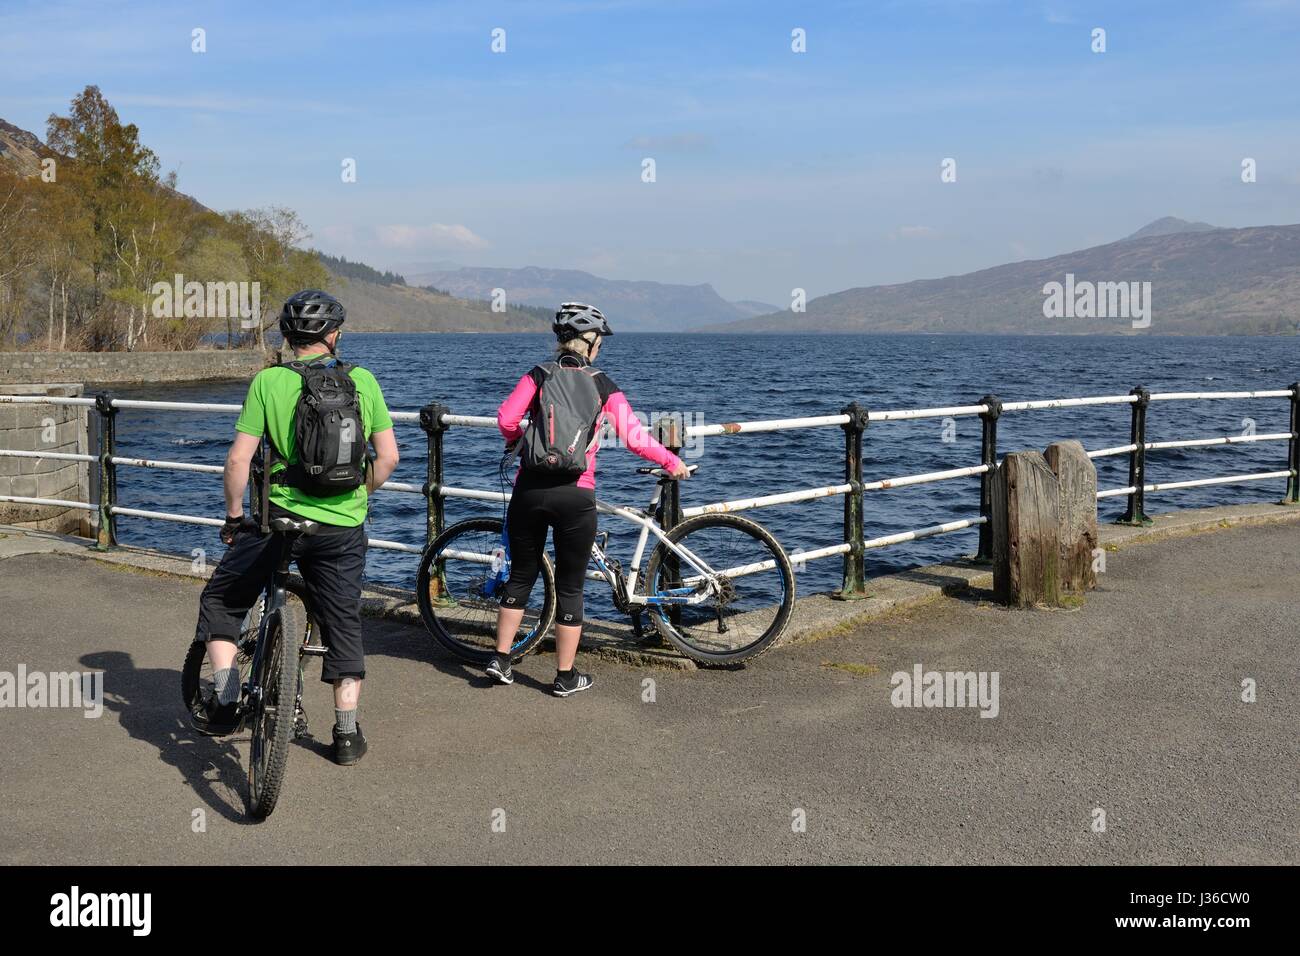 Two cyclists reach the pier at Stronachlachar overlooking Loch Katrine which is a freshwater loch in the Trossachs area of Scotland, UK Stock Photo